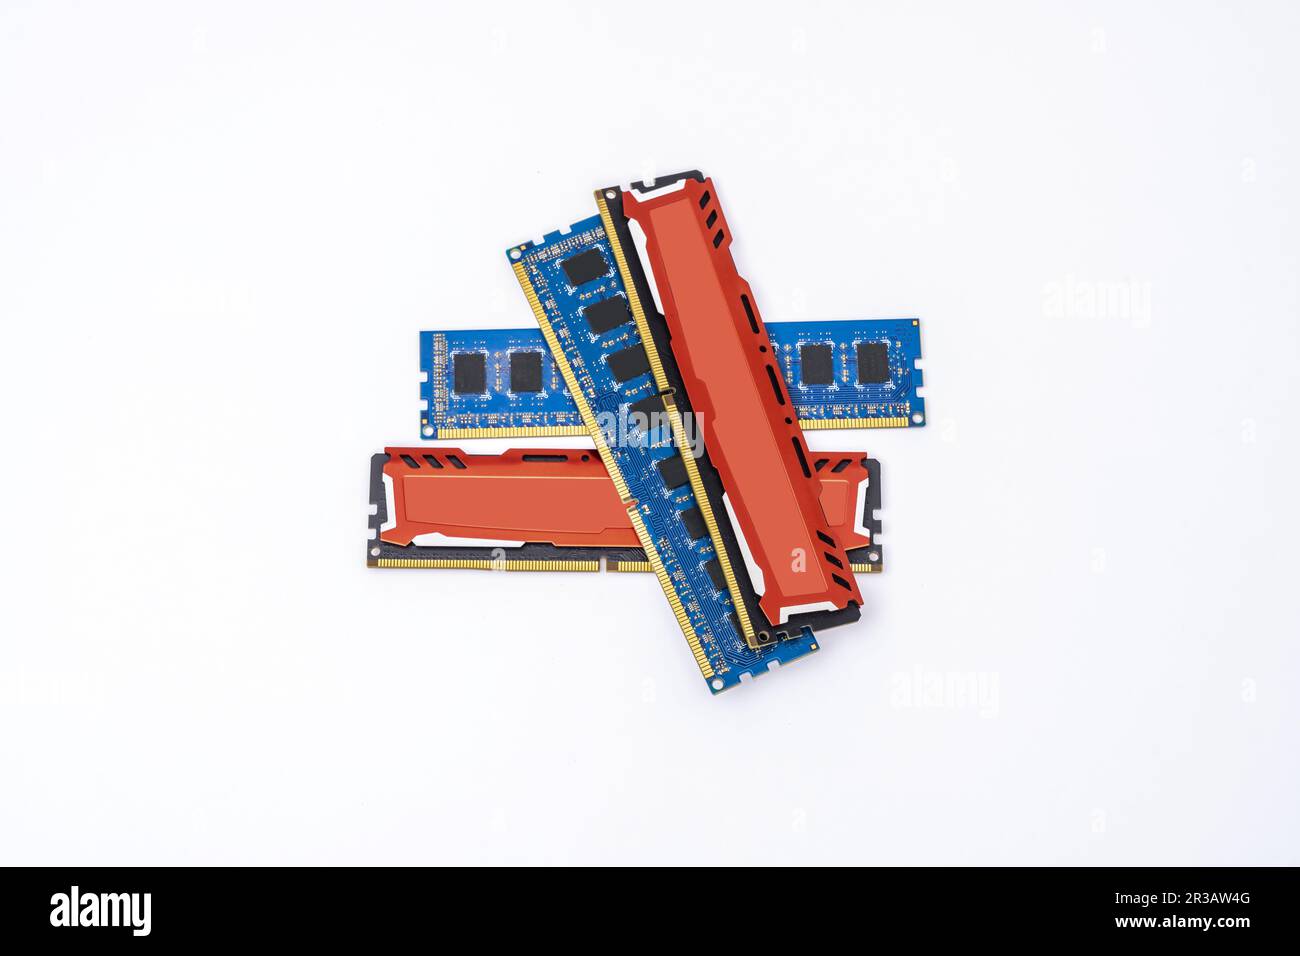 Some mixed ddr3 and ddr4 ram memory modules on a plain white surface Stock Photo